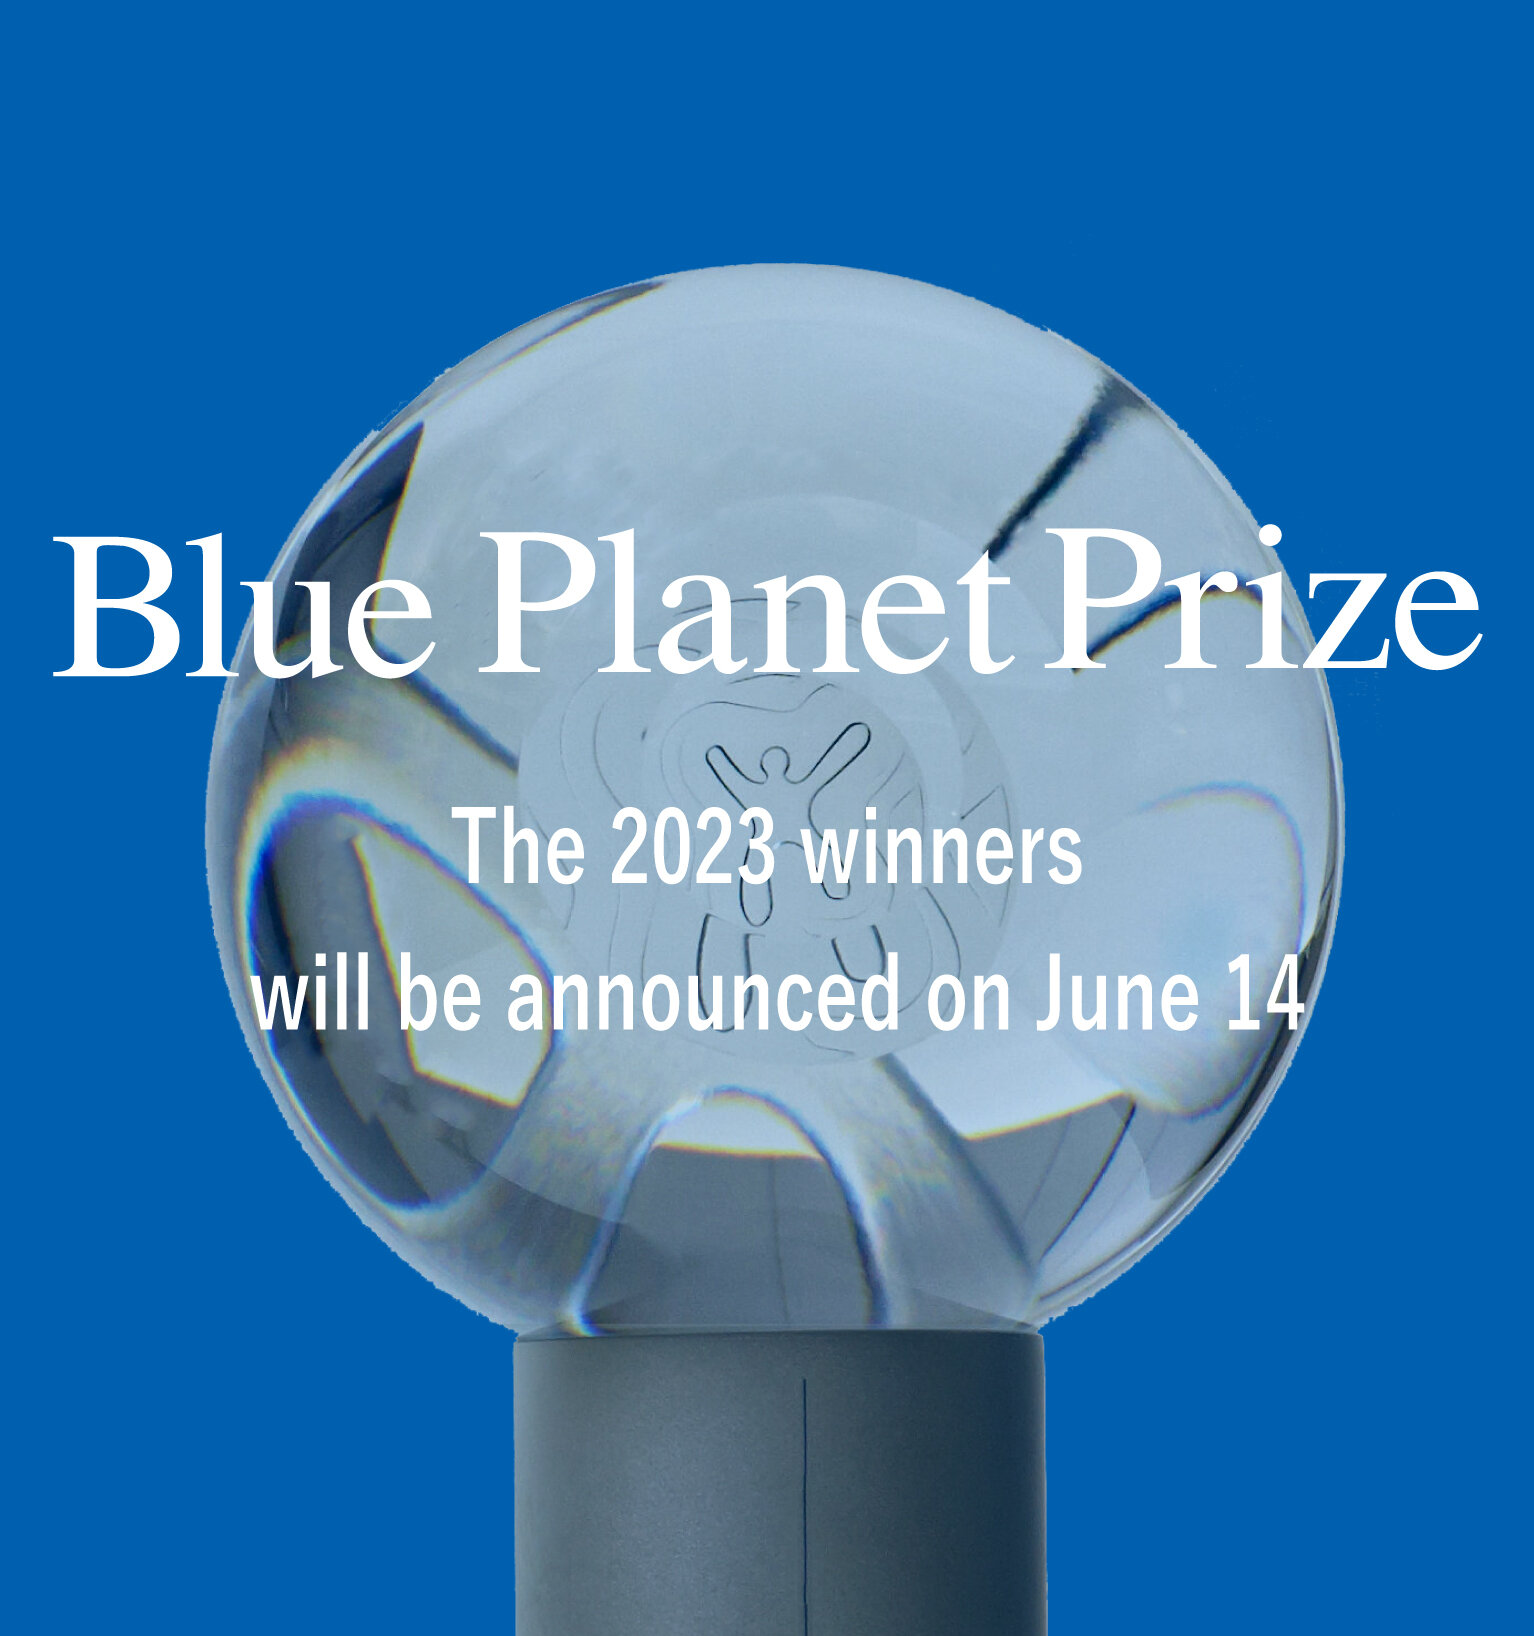 The 2023 Blue Planet Prize winners will be announced on June 14